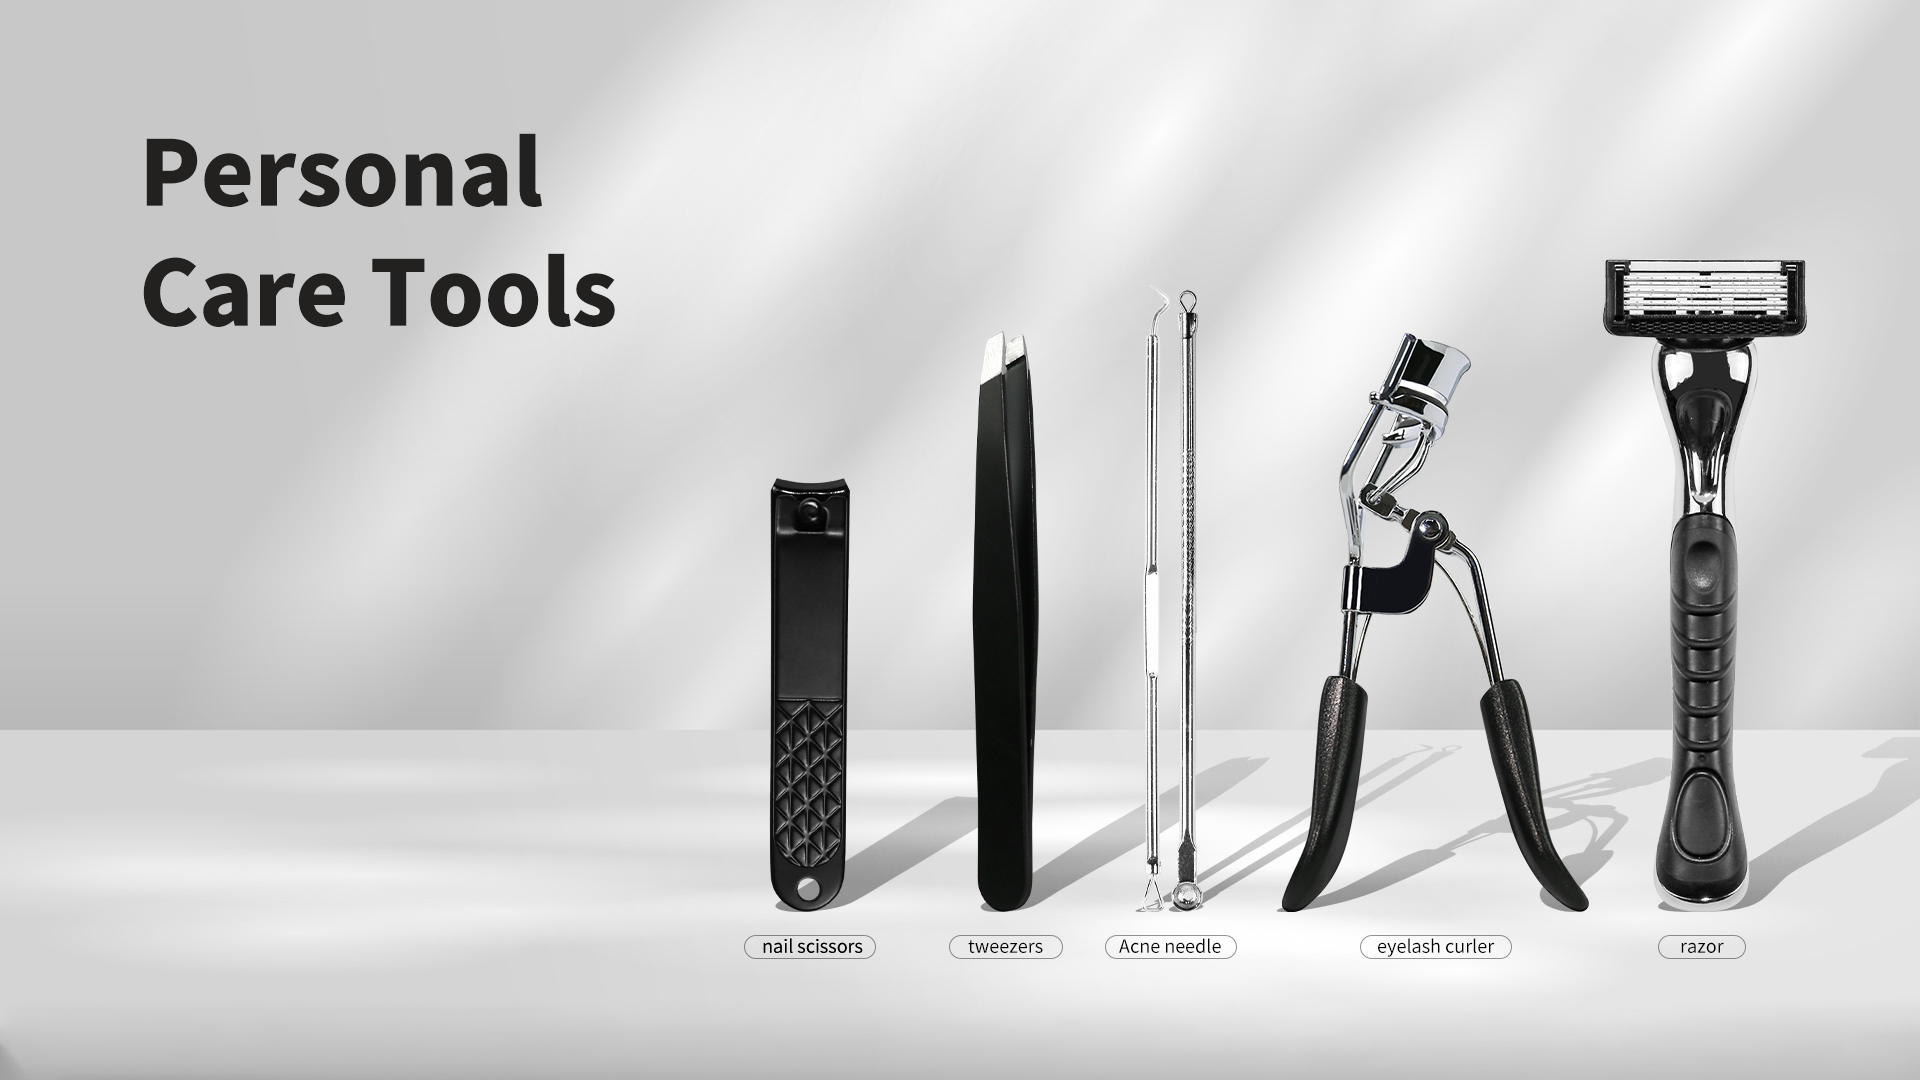 Matgicol personal grooming products collection